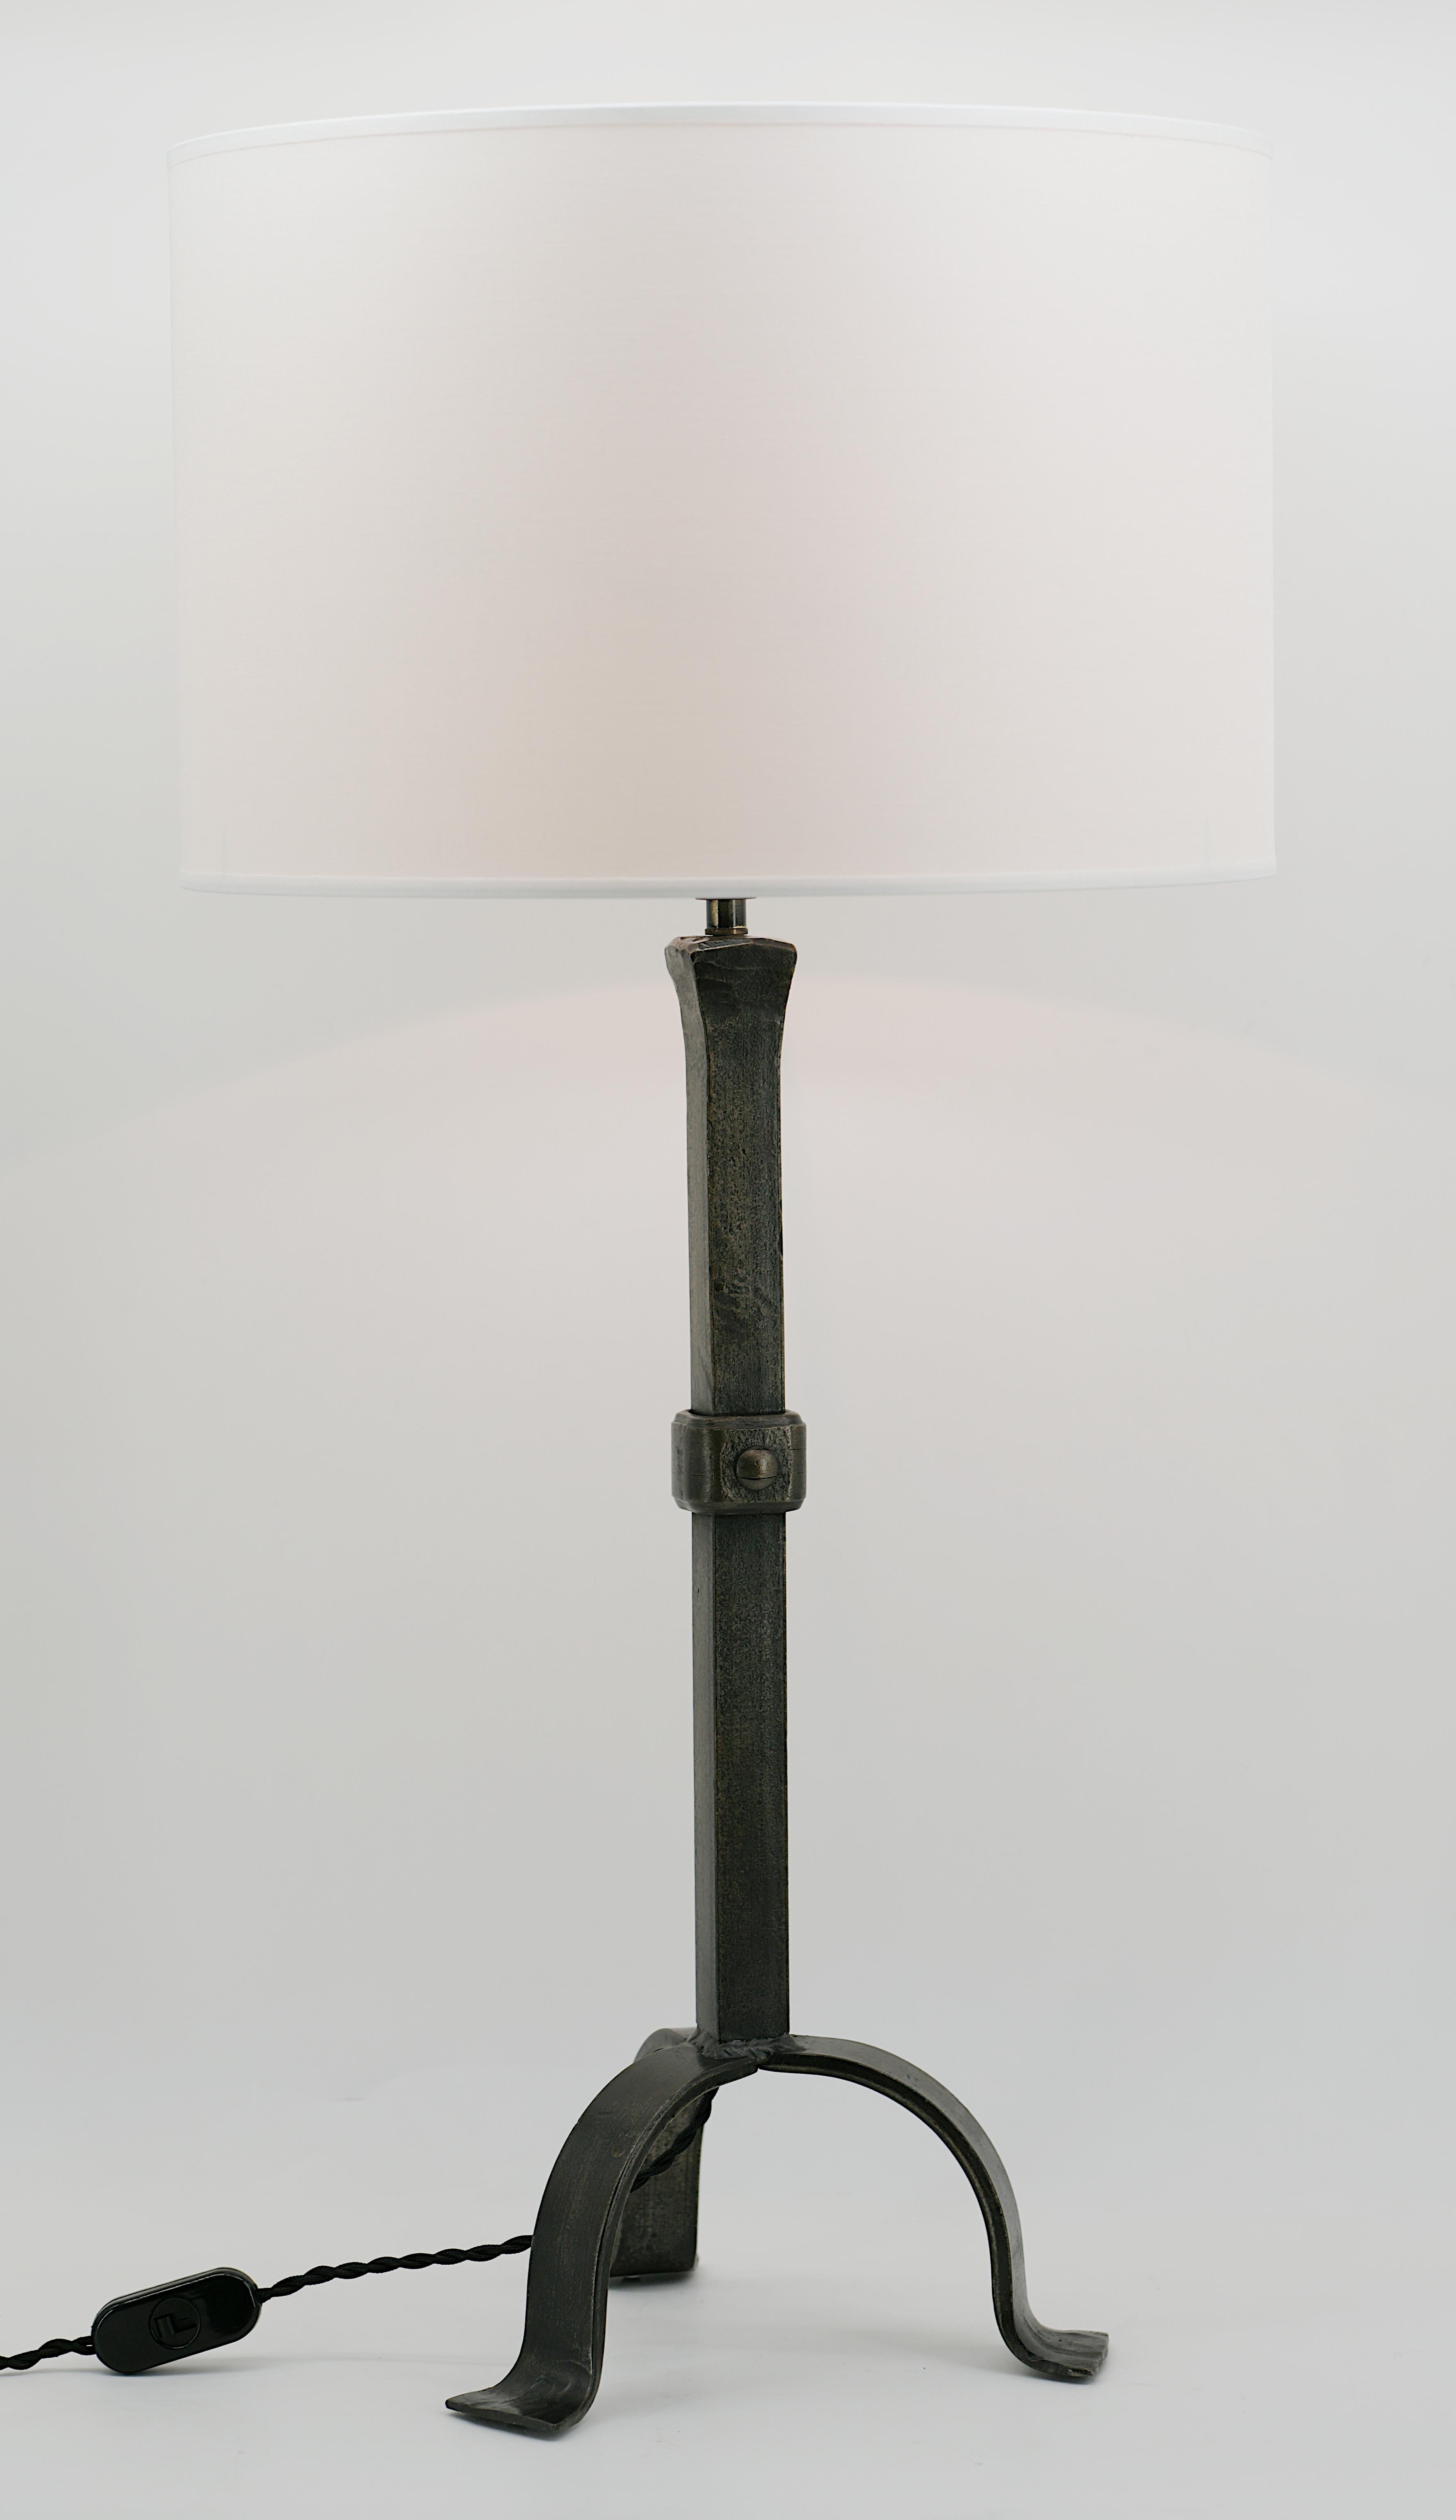 Jean-Pierre Ryckaert Large Mid-Century Table Lamp, Ca.1950 In Excellent Condition For Sale In Saint-Amans-des-Cots, FR